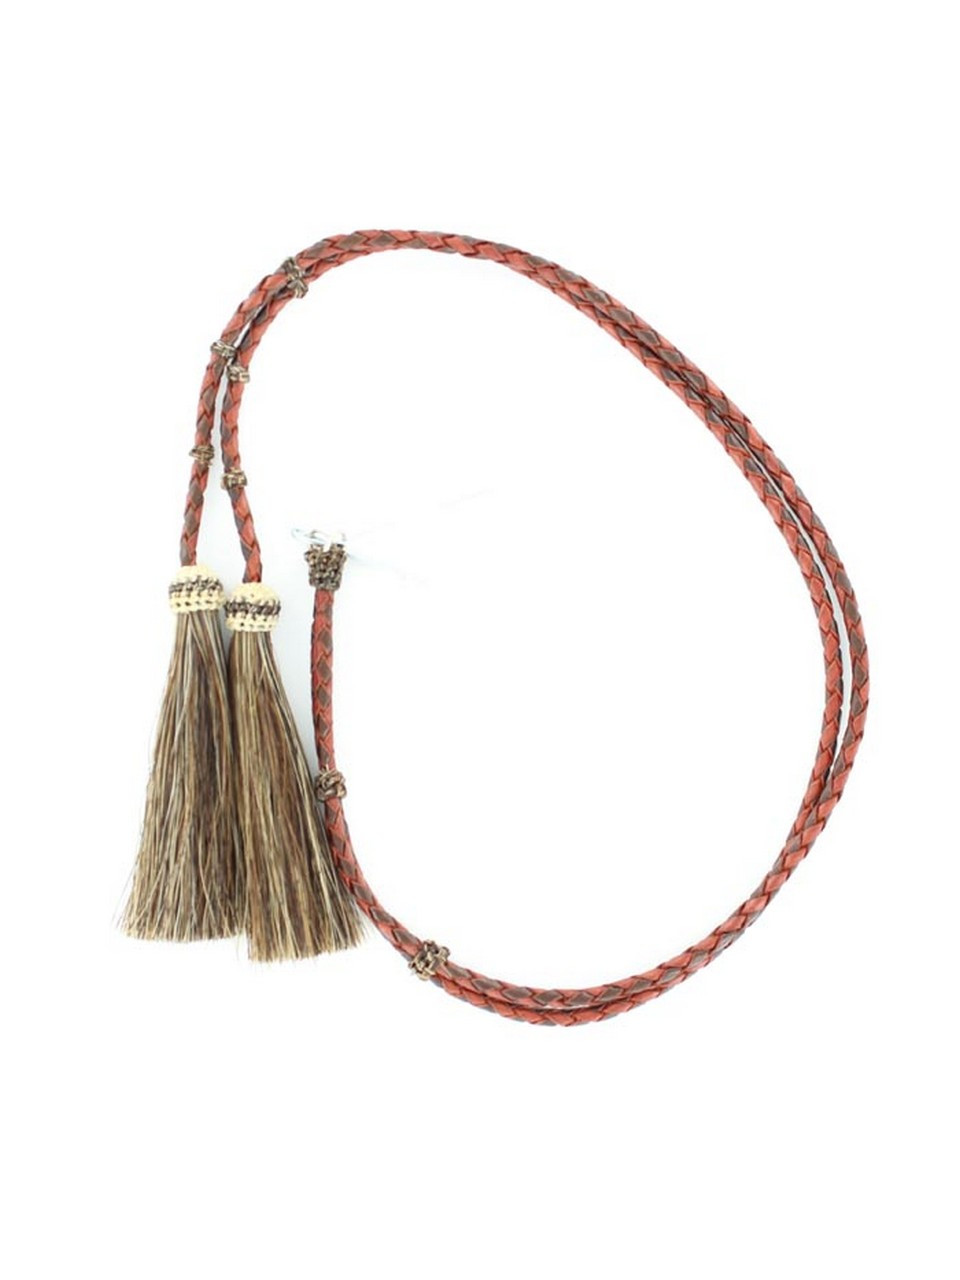 M&F® 2-Tone Braided Leather Horsehair Stampede String